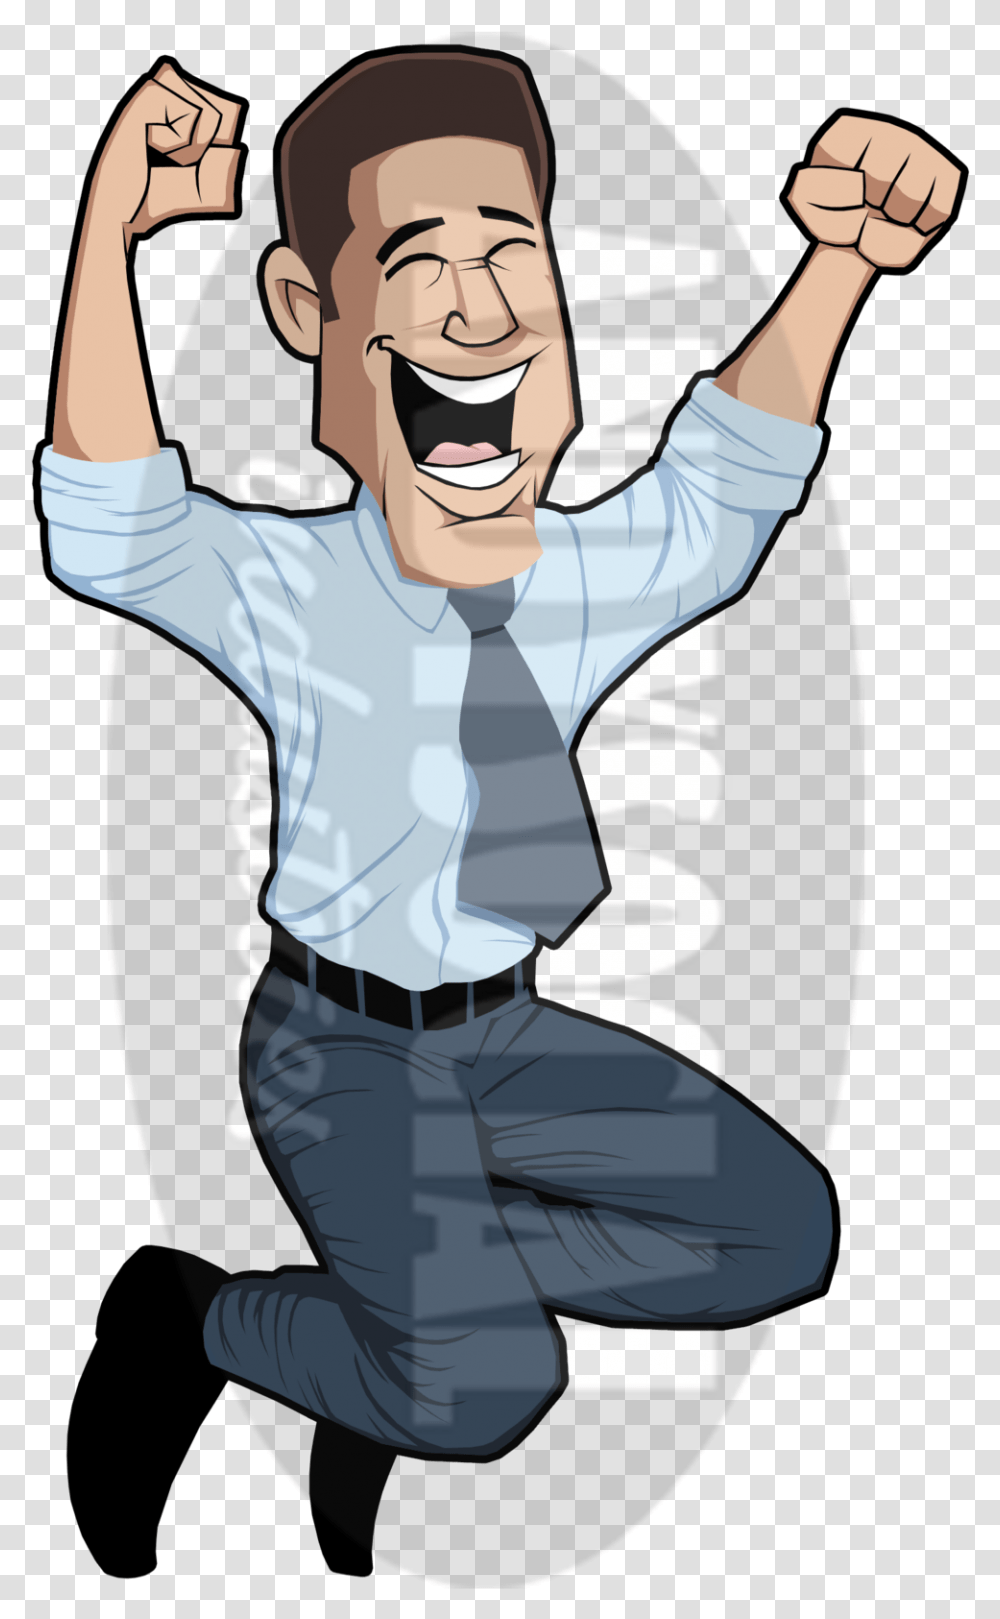 Jumping Guy Small Watermark, Person, Tie, Accessories Transparent Png